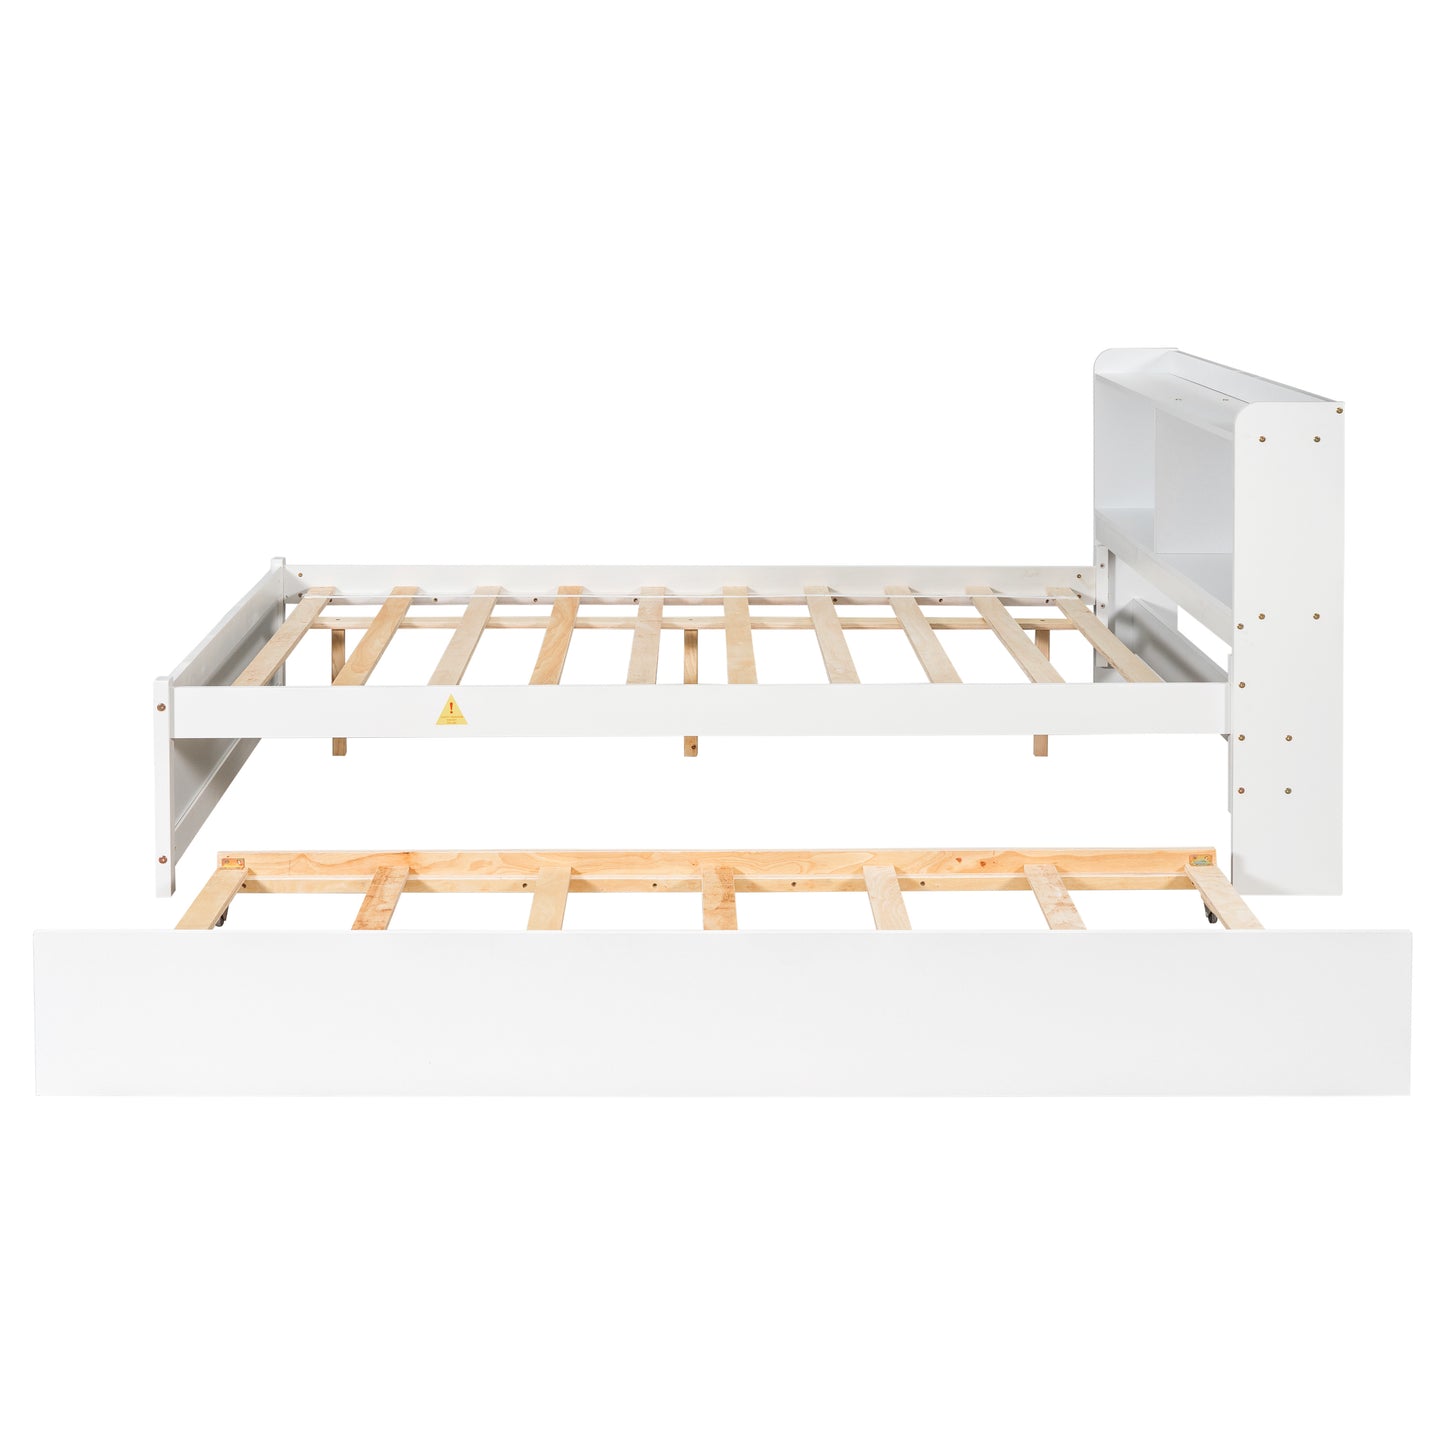 Full Platform Bed with Trundle, Bookcase, White